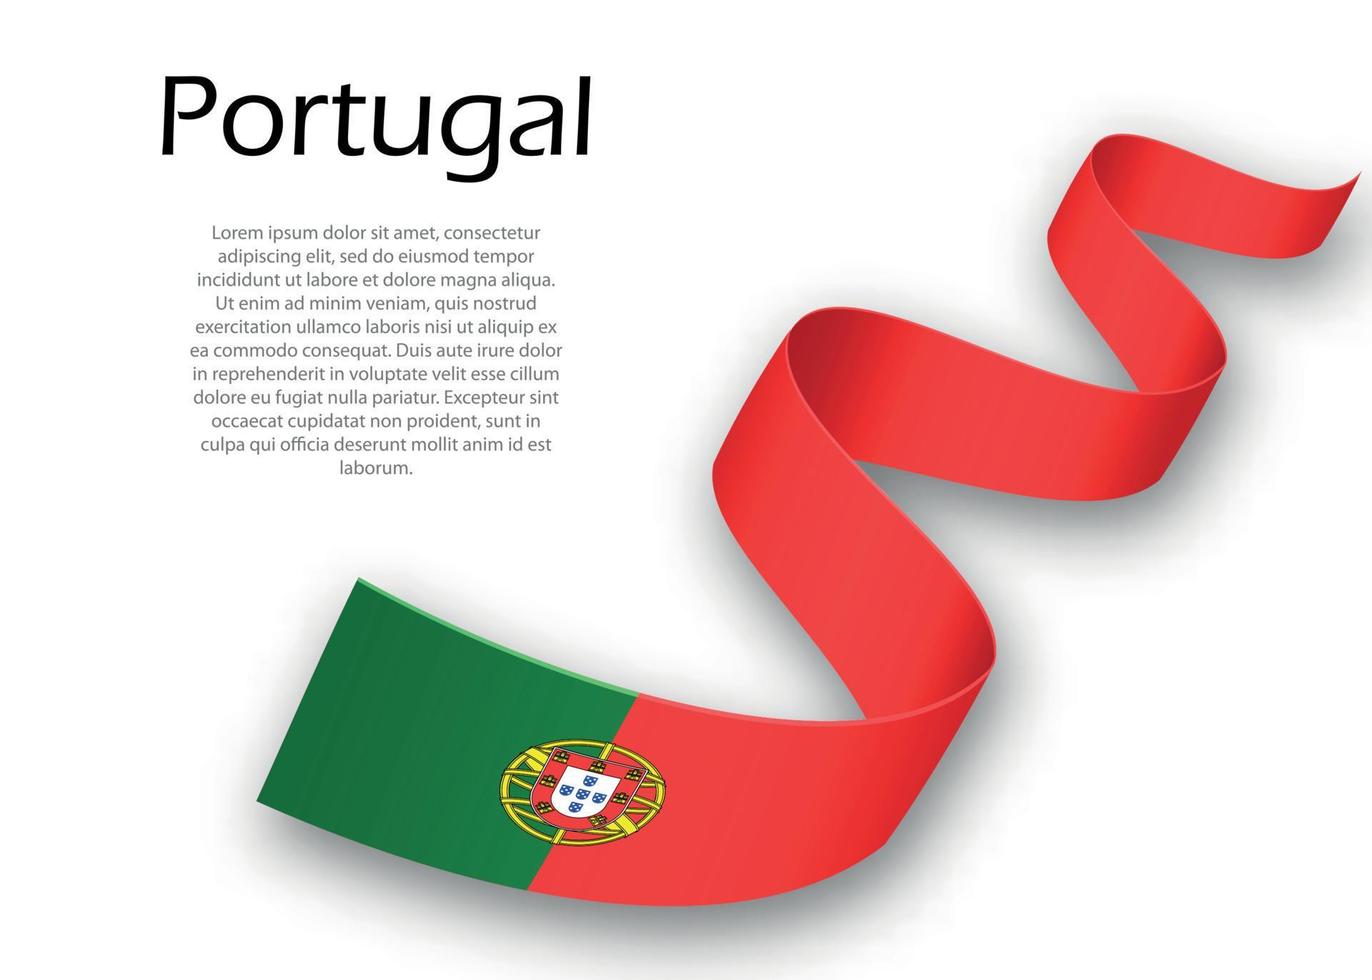 Waving ribbon or banner with flag of Portugal vector